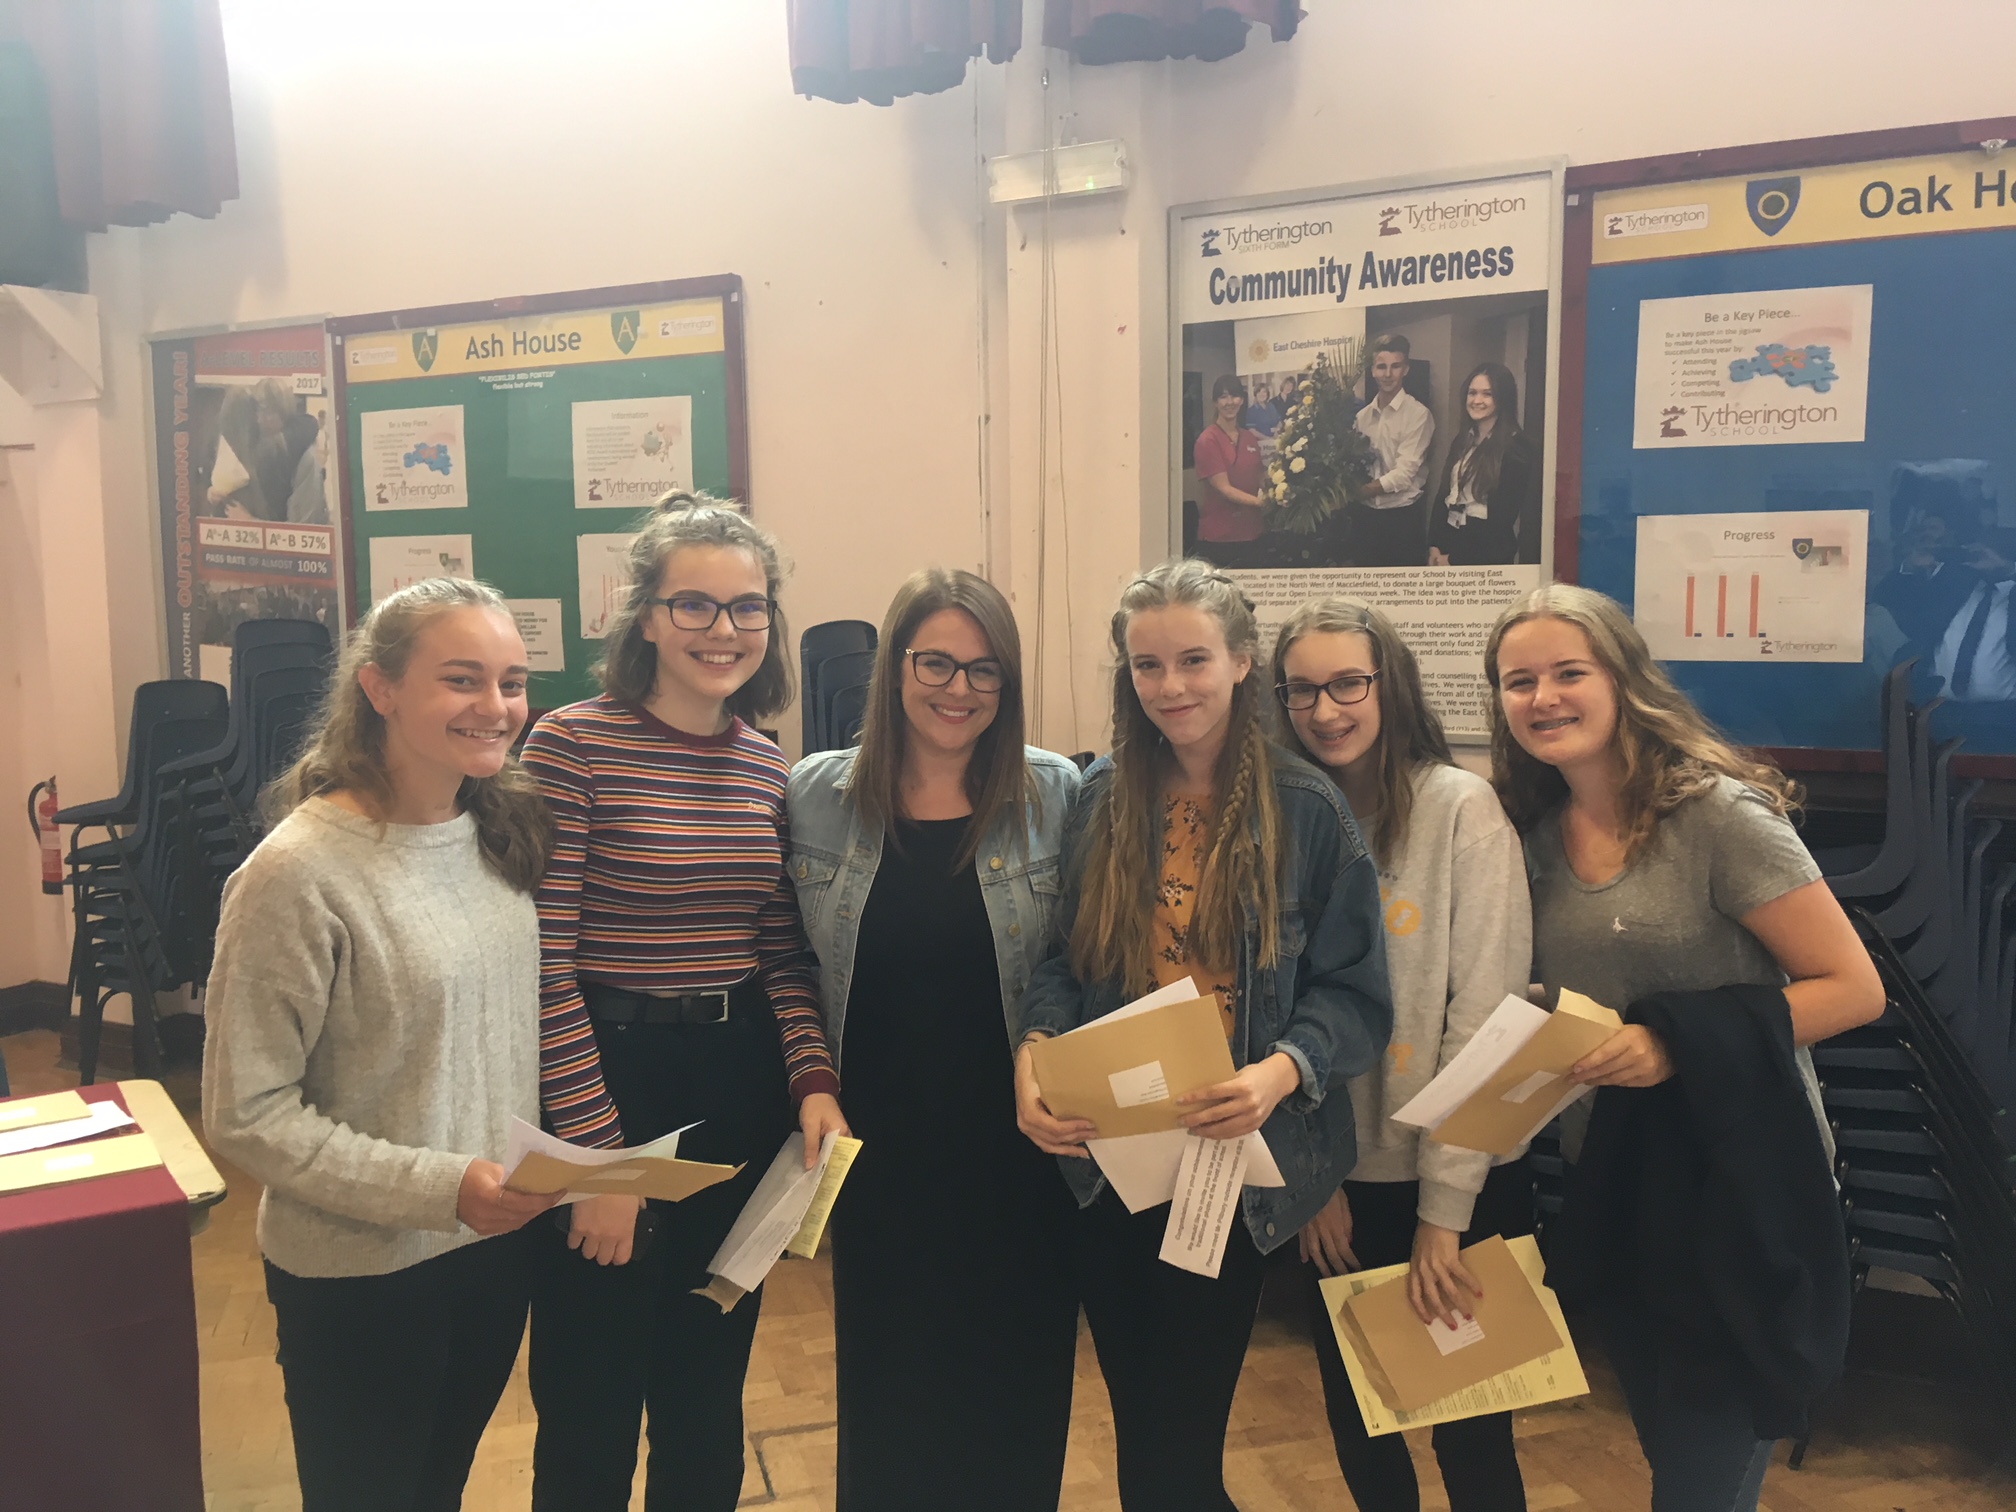 Emily Griffen, Rebecca Purves, Mrs Healey, Vicky Wilson, Laura Barber and Ellen Marchetti